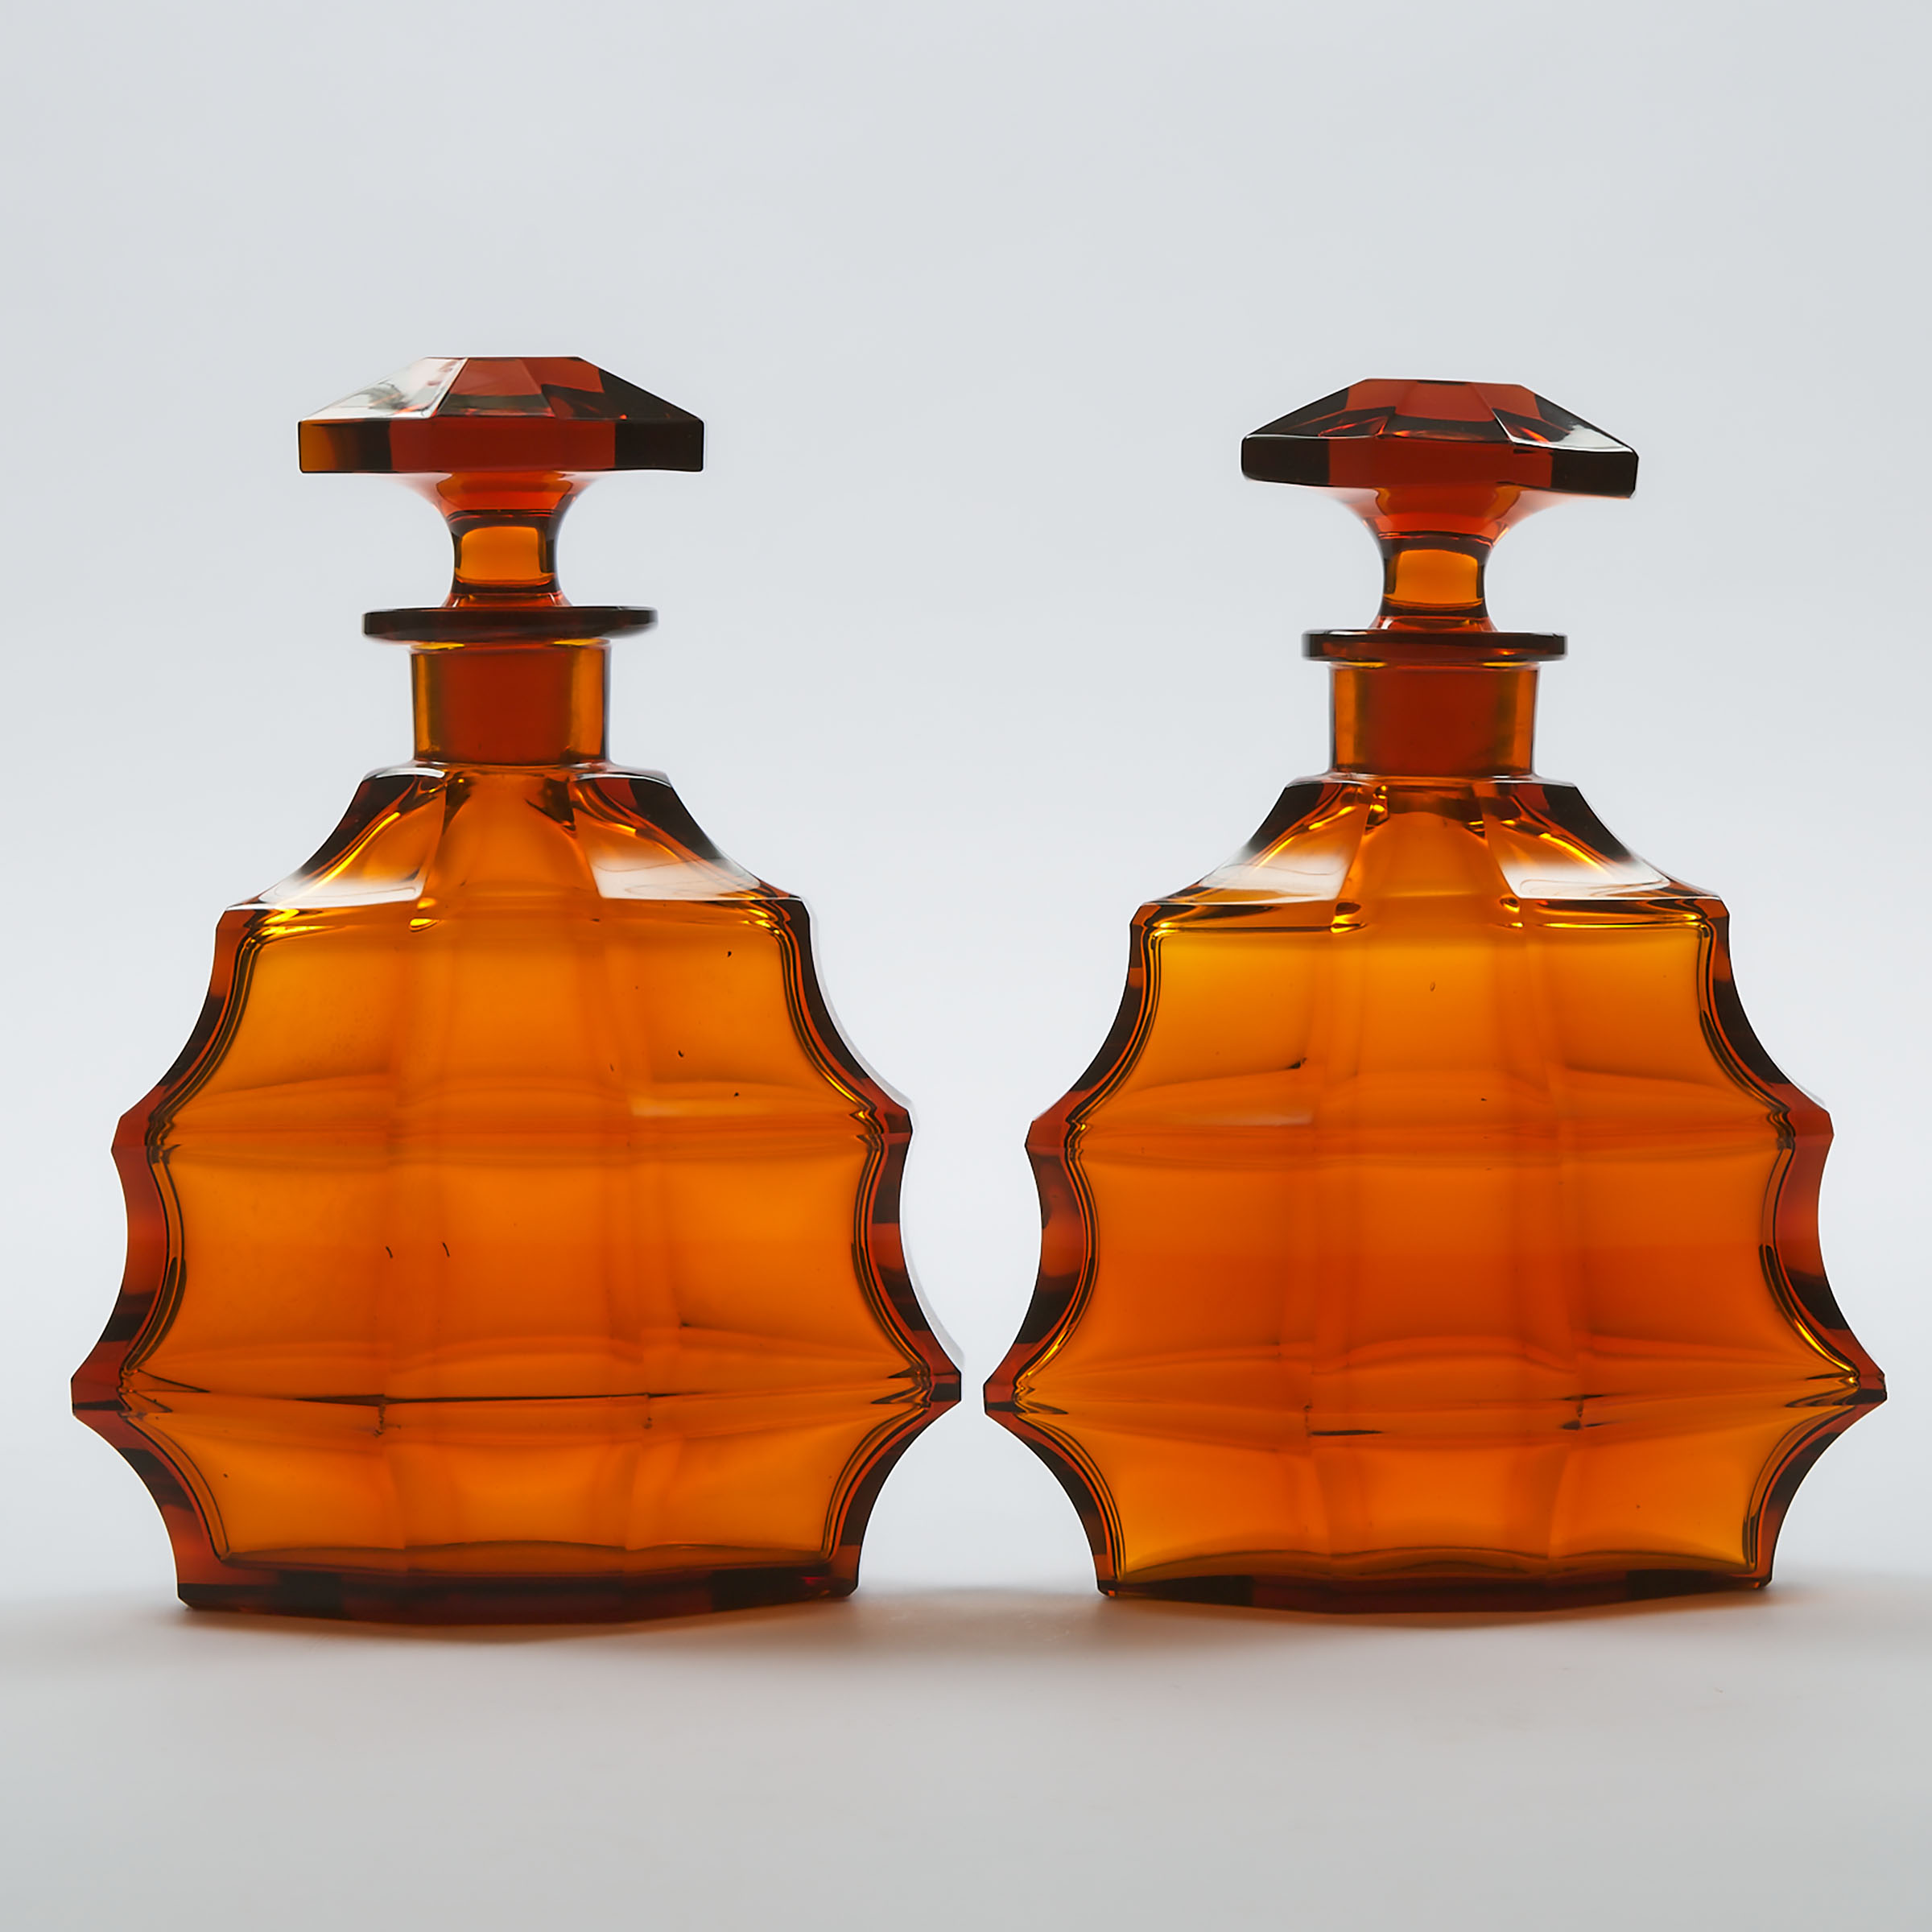 Pair of Moser Cut Amber Glass Decanters, 20th century